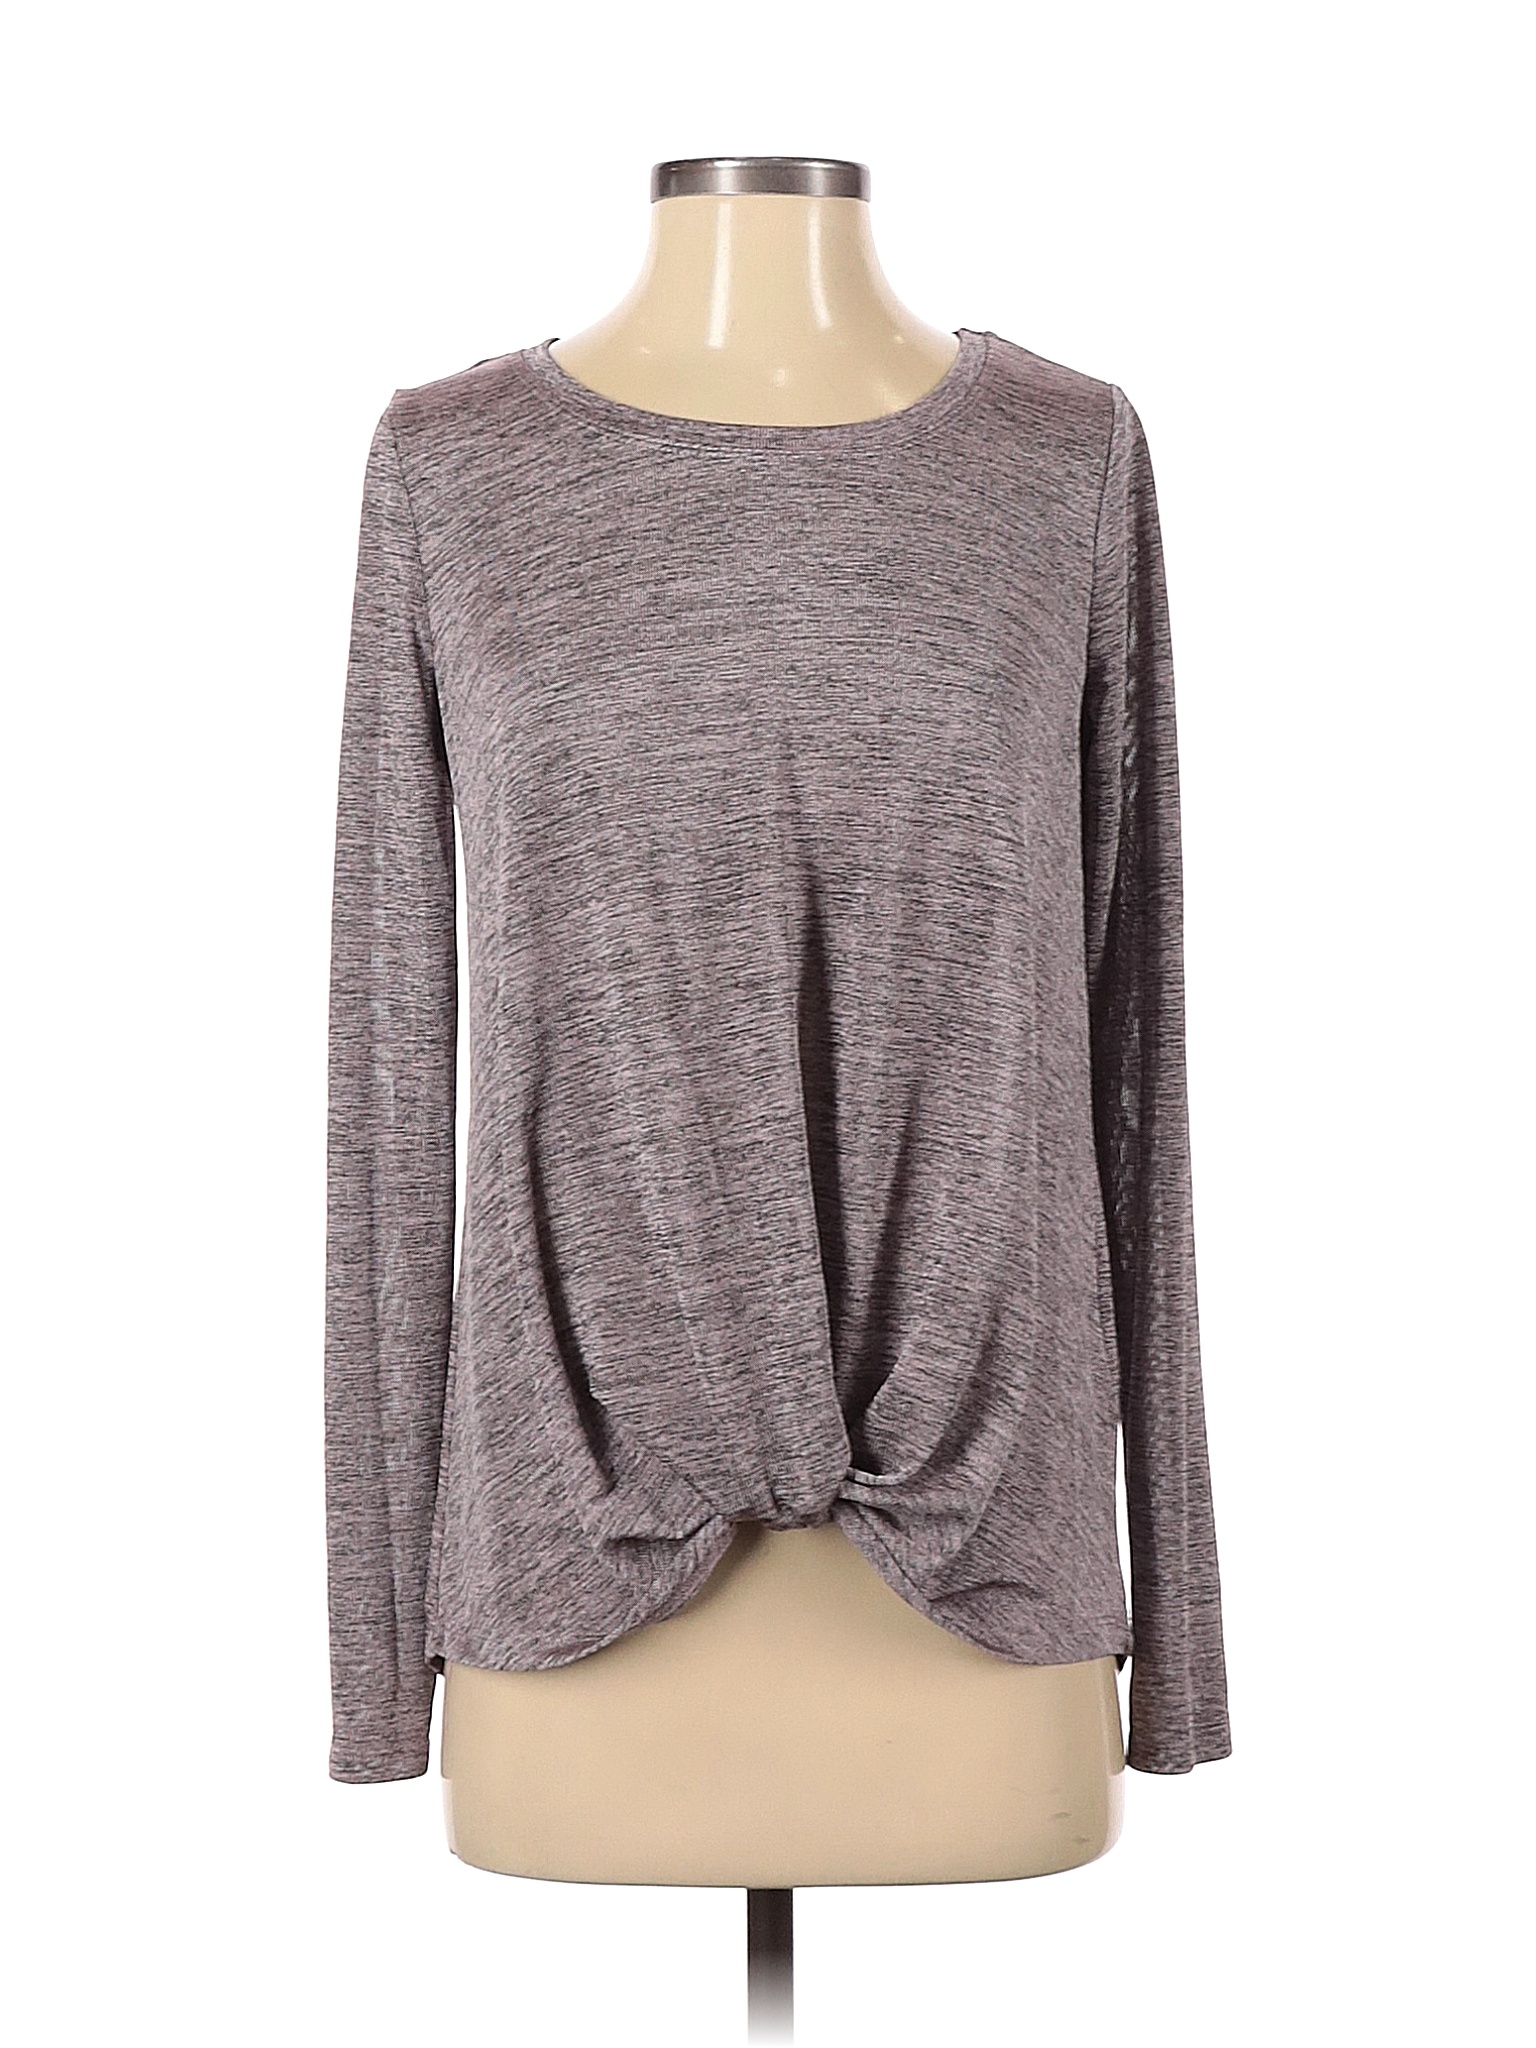 Jane and Delancey Gray Pink Long Sleeve Top Size S - 72% off | thredUP